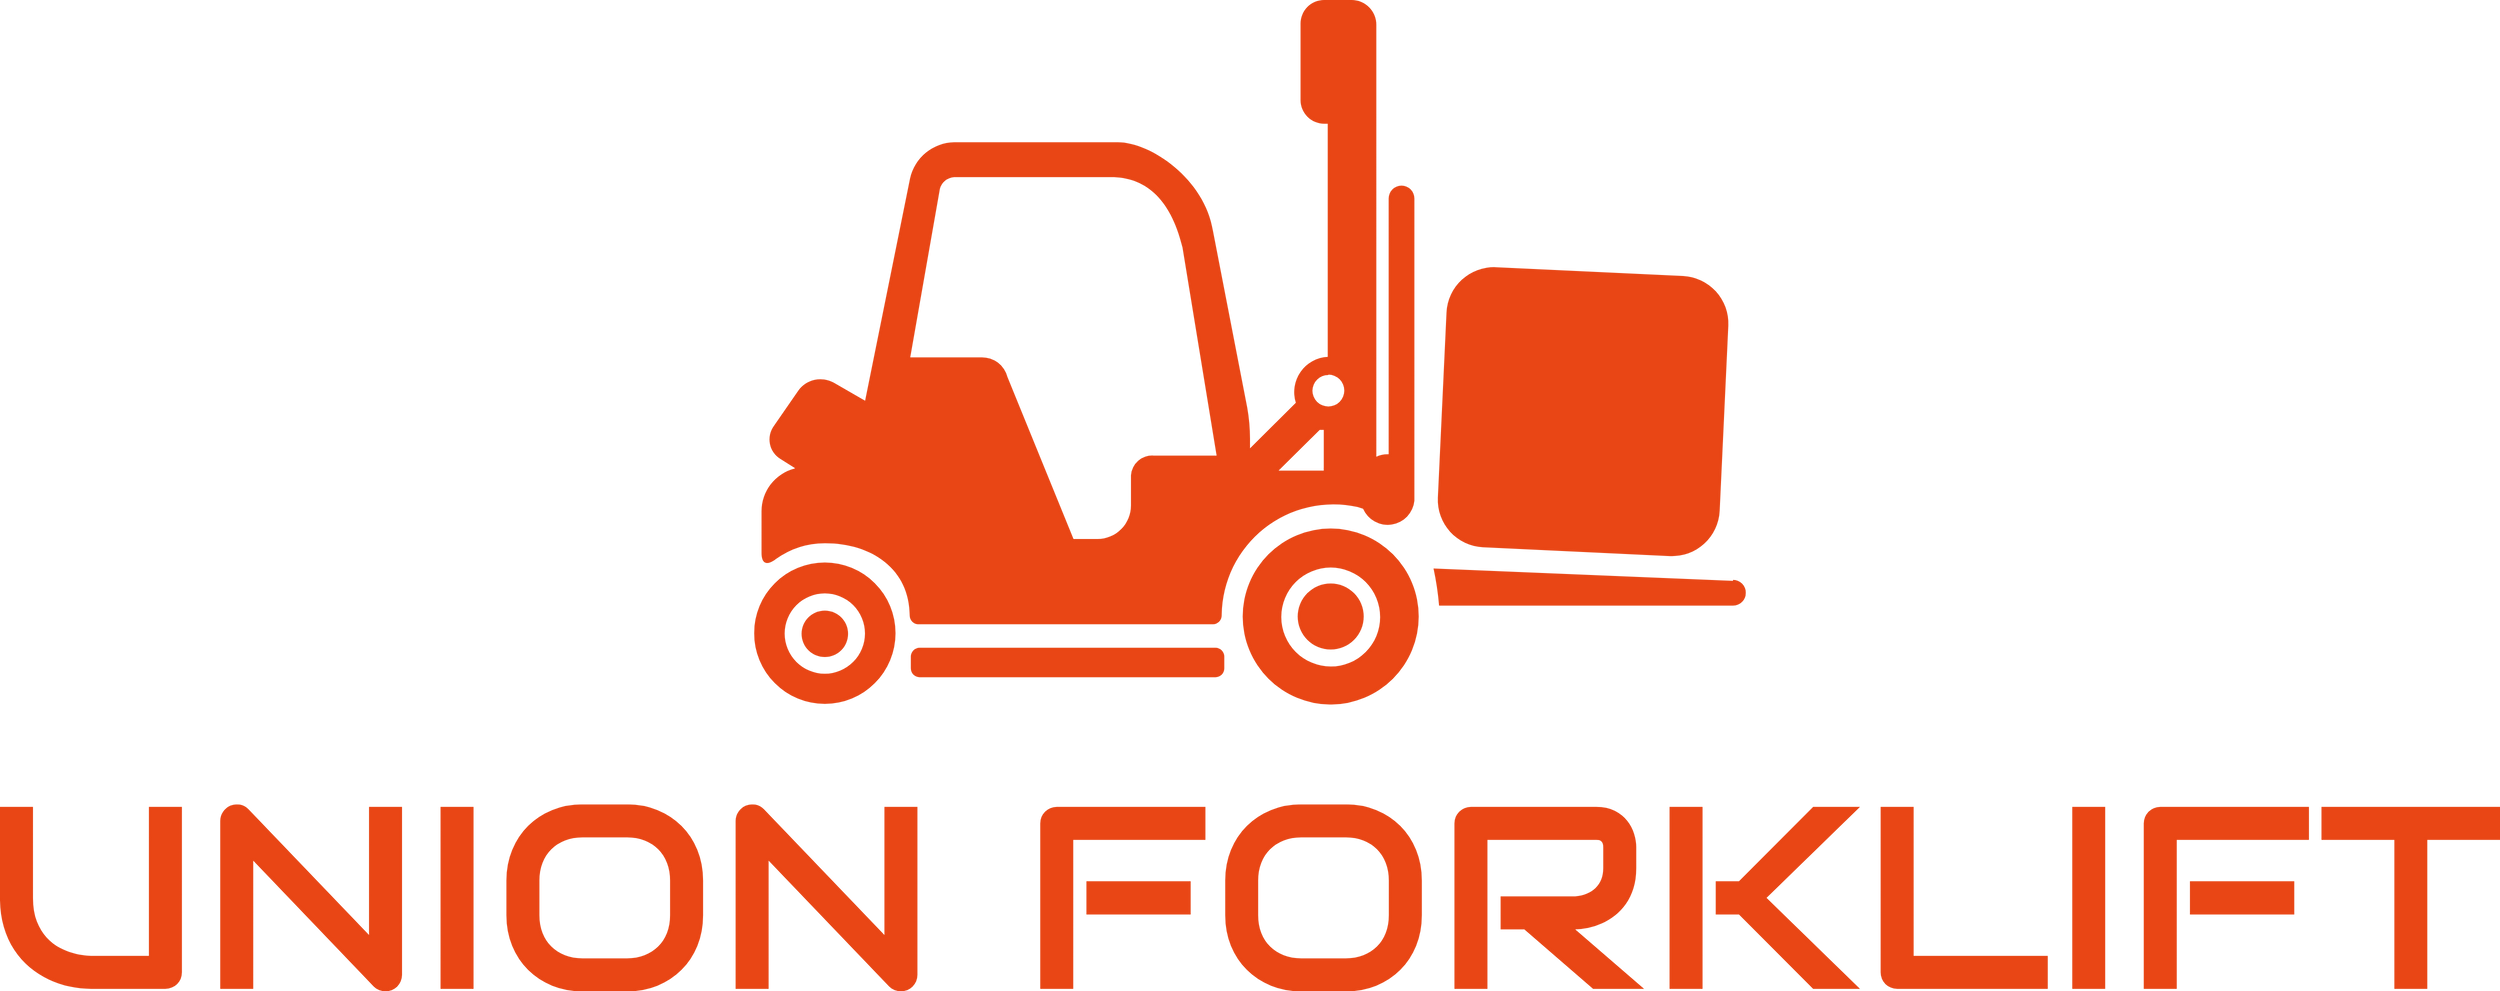 Lithium Battery Forklift Rental, Maintenance Repair & Leasing in Singapore | Buy USED Diesel, Heavy Forklift Spare Parts, Electric Pallet Jack, Stacker, Reach Truck Tyres